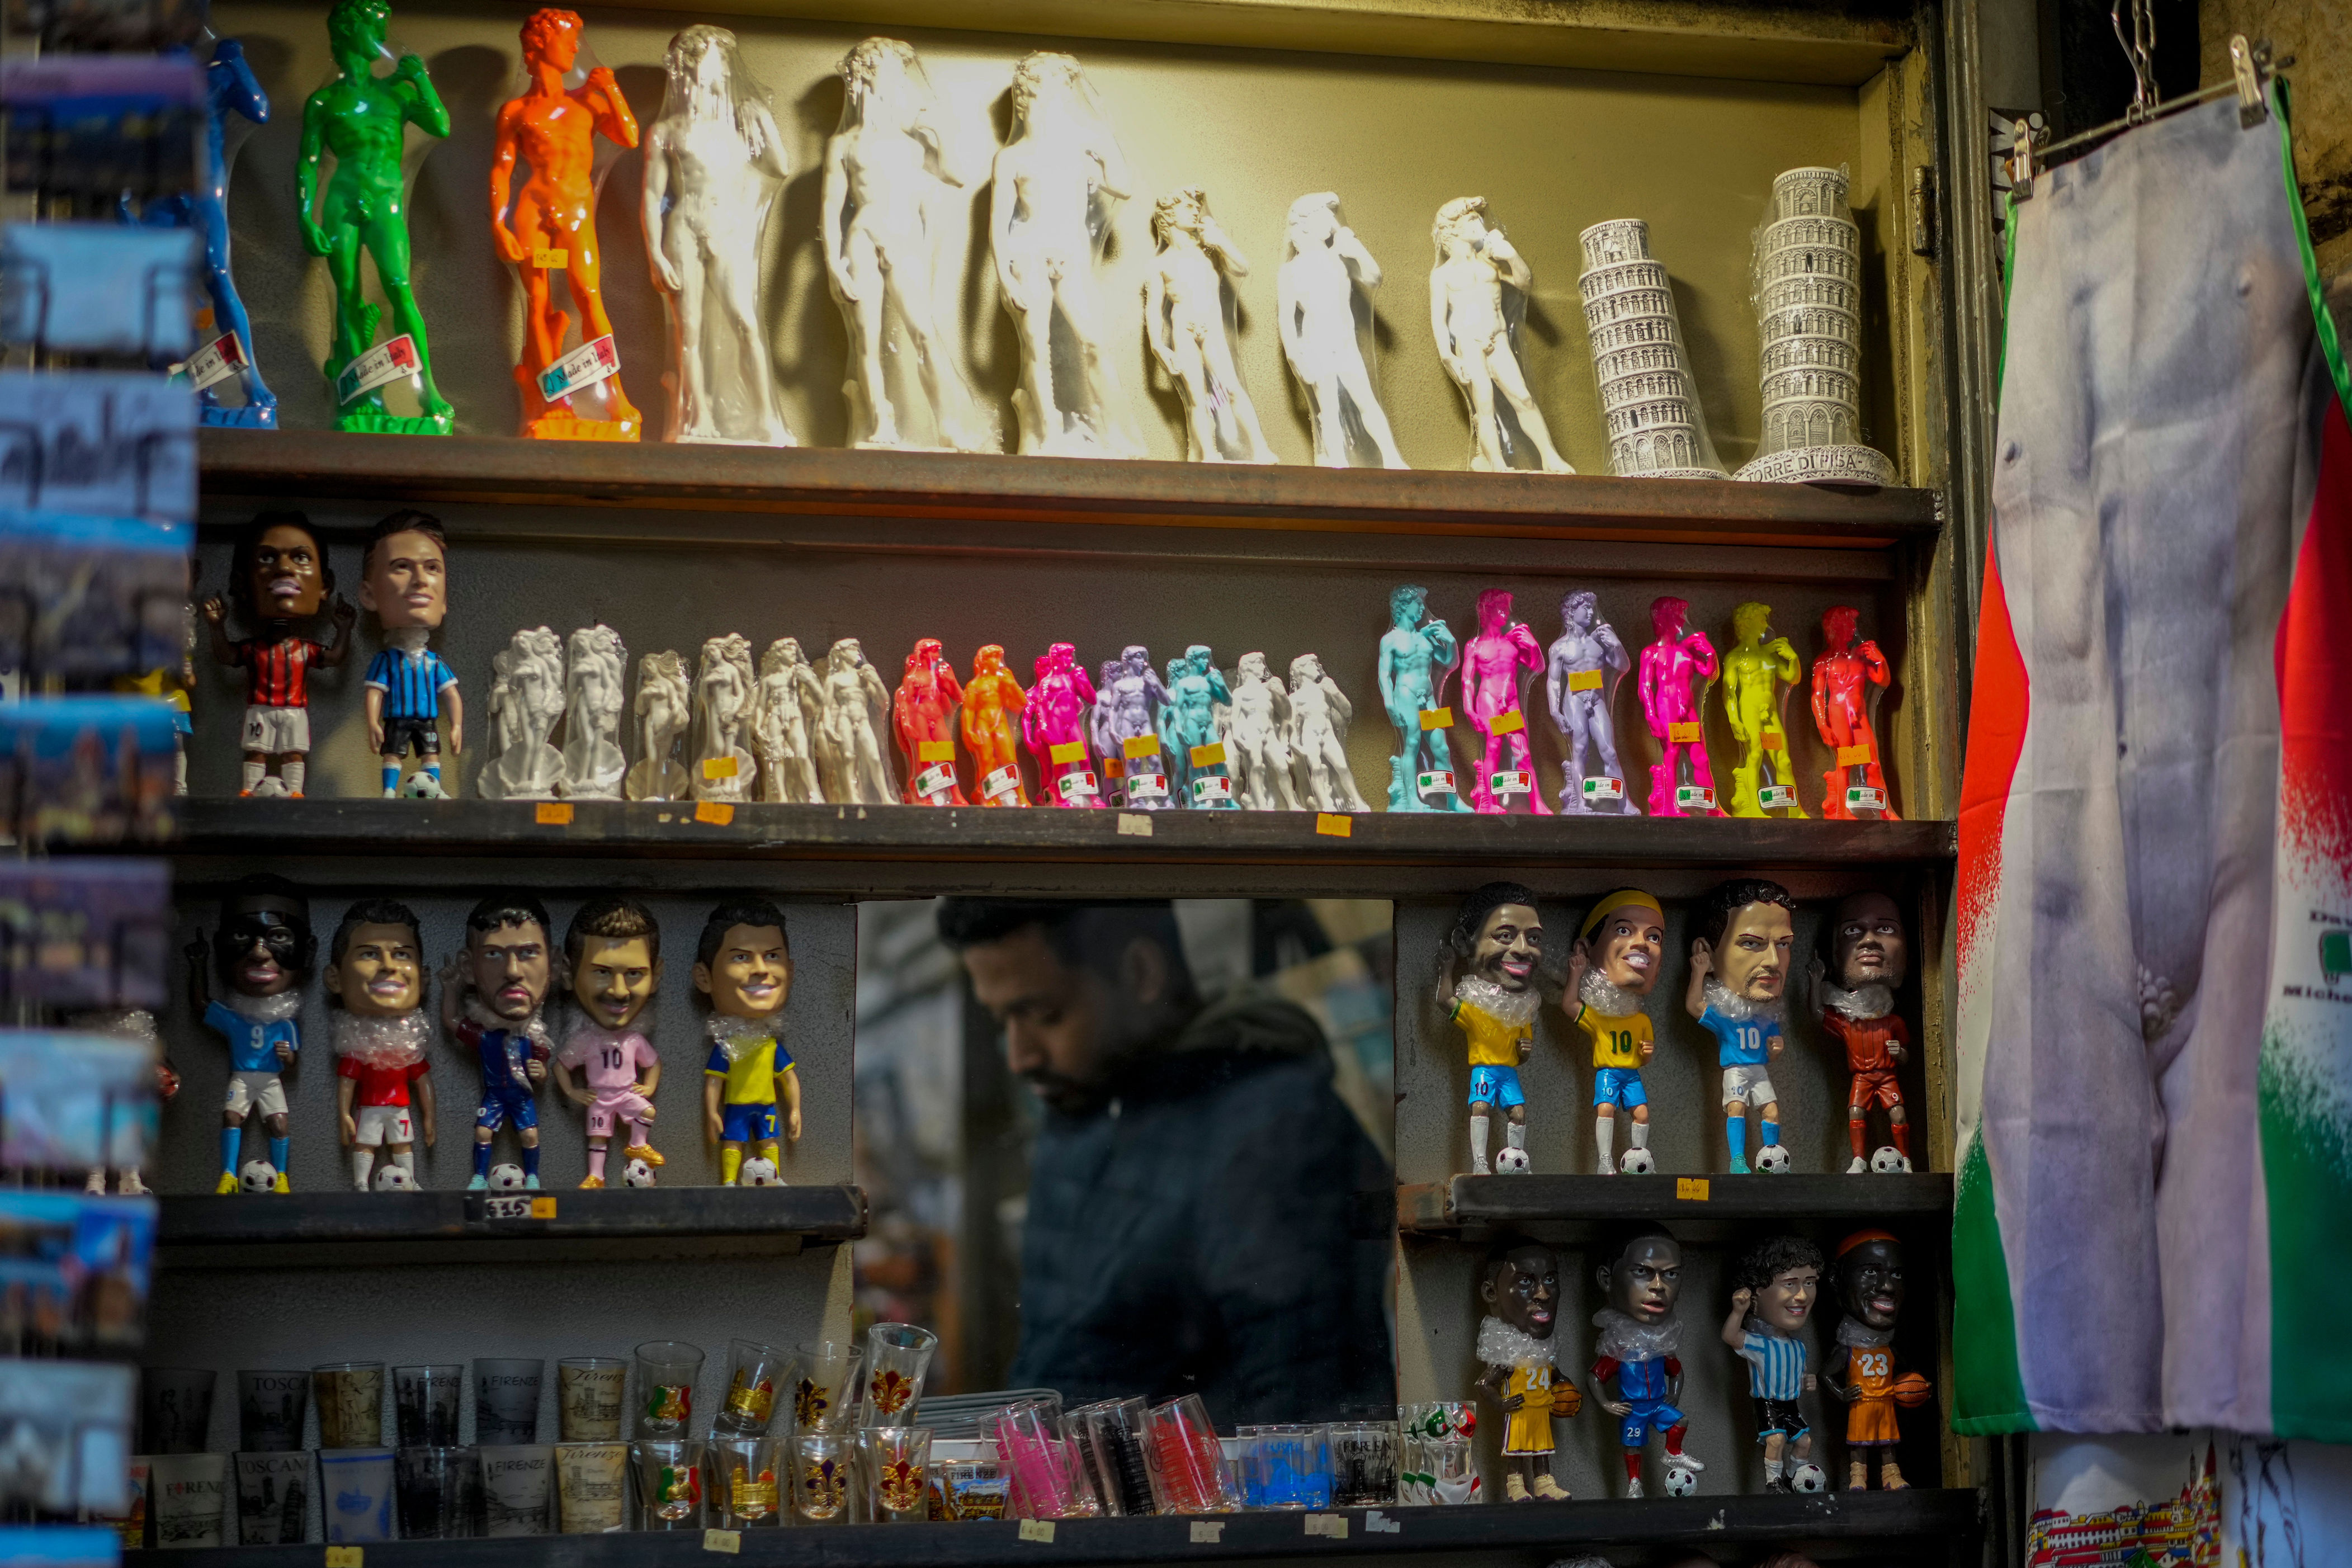 italy is fighting back against souvenirs focusing on michelangelo’s david genitals